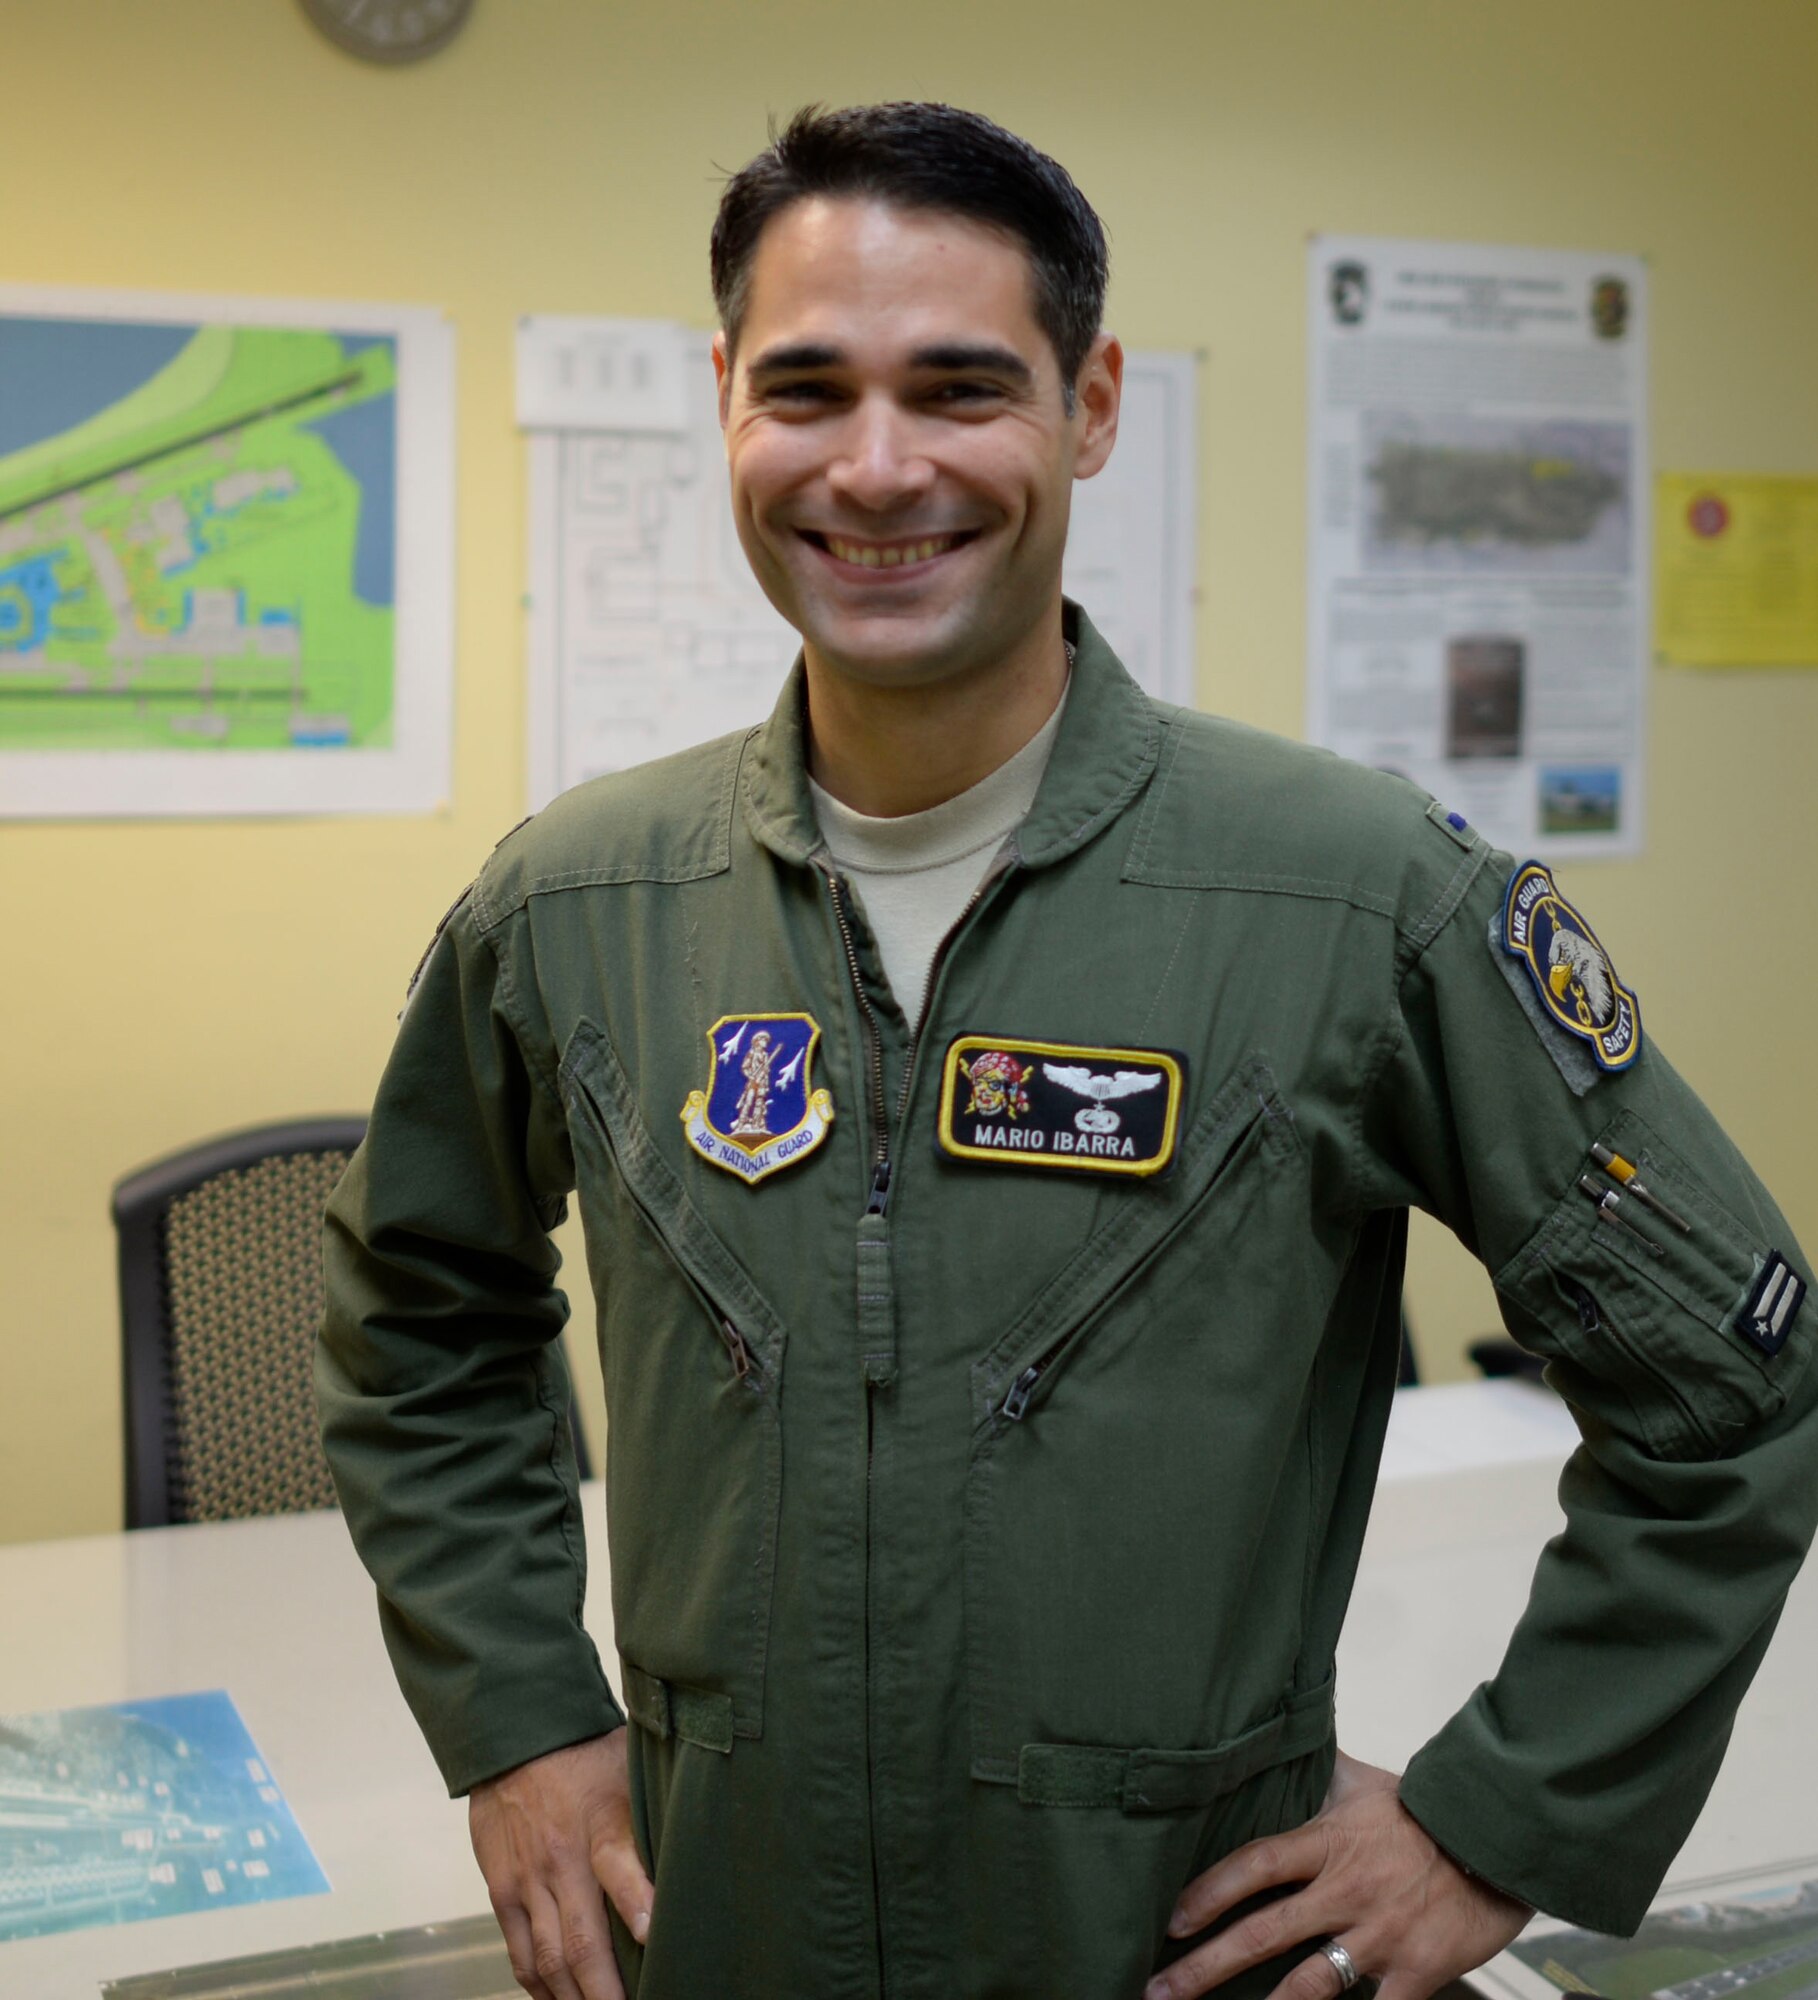 U.S. Air Force Capt. Mario Ibarra, flight safety officer of the 156th Airlift Wing, Puerto Rico Air National Guard, was recently awarded the Air National Individual Flight Safety Award for 2015. The Air National Guard Safety Award is a national level award issued annually to competing ANG members and organizations from around the nation that demonstrate a culture of safety excellence. (U.S. Air National Guard photo by Staff Sgt. Christian Jadot)